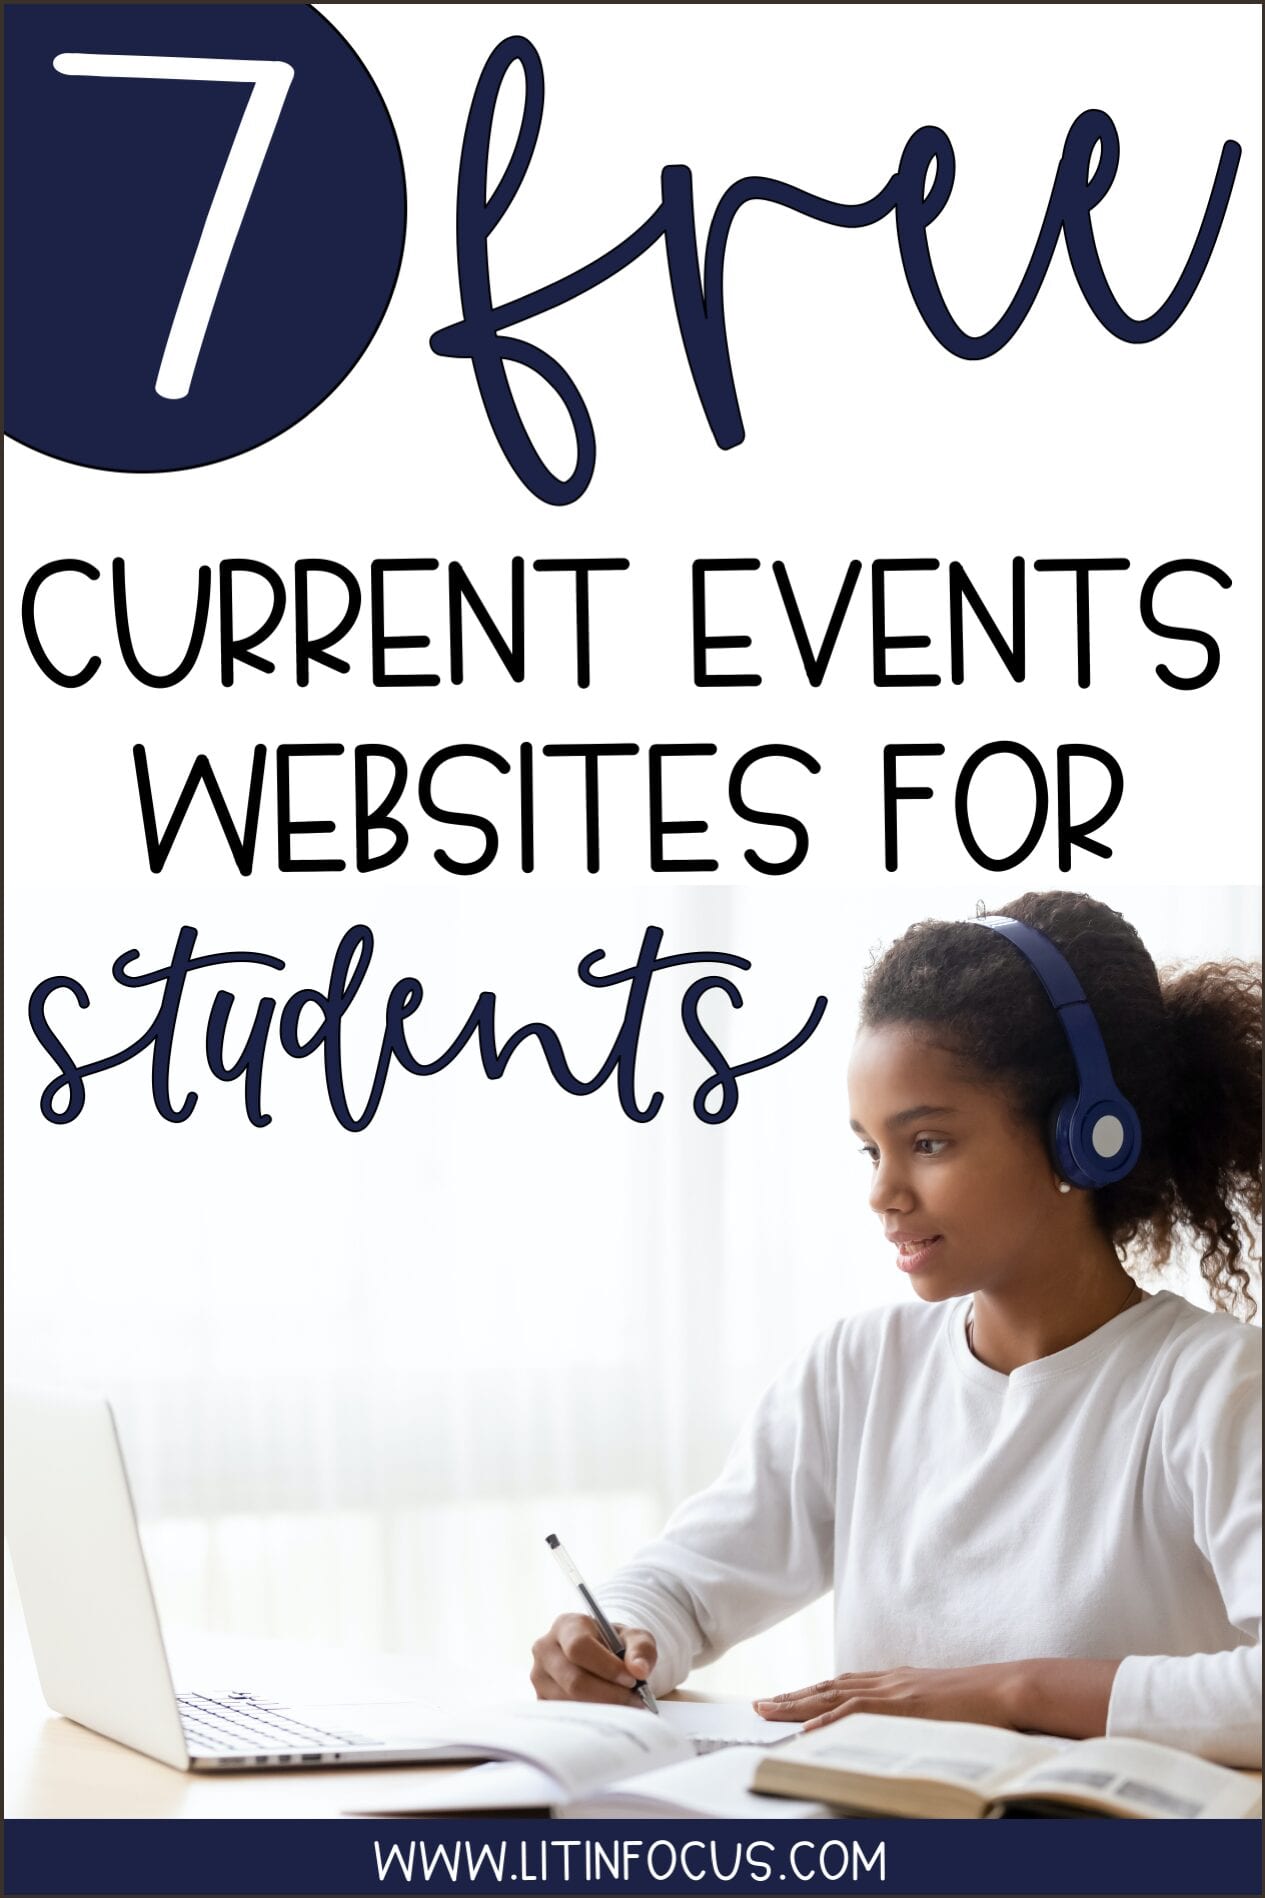 Seven free current event websites for students